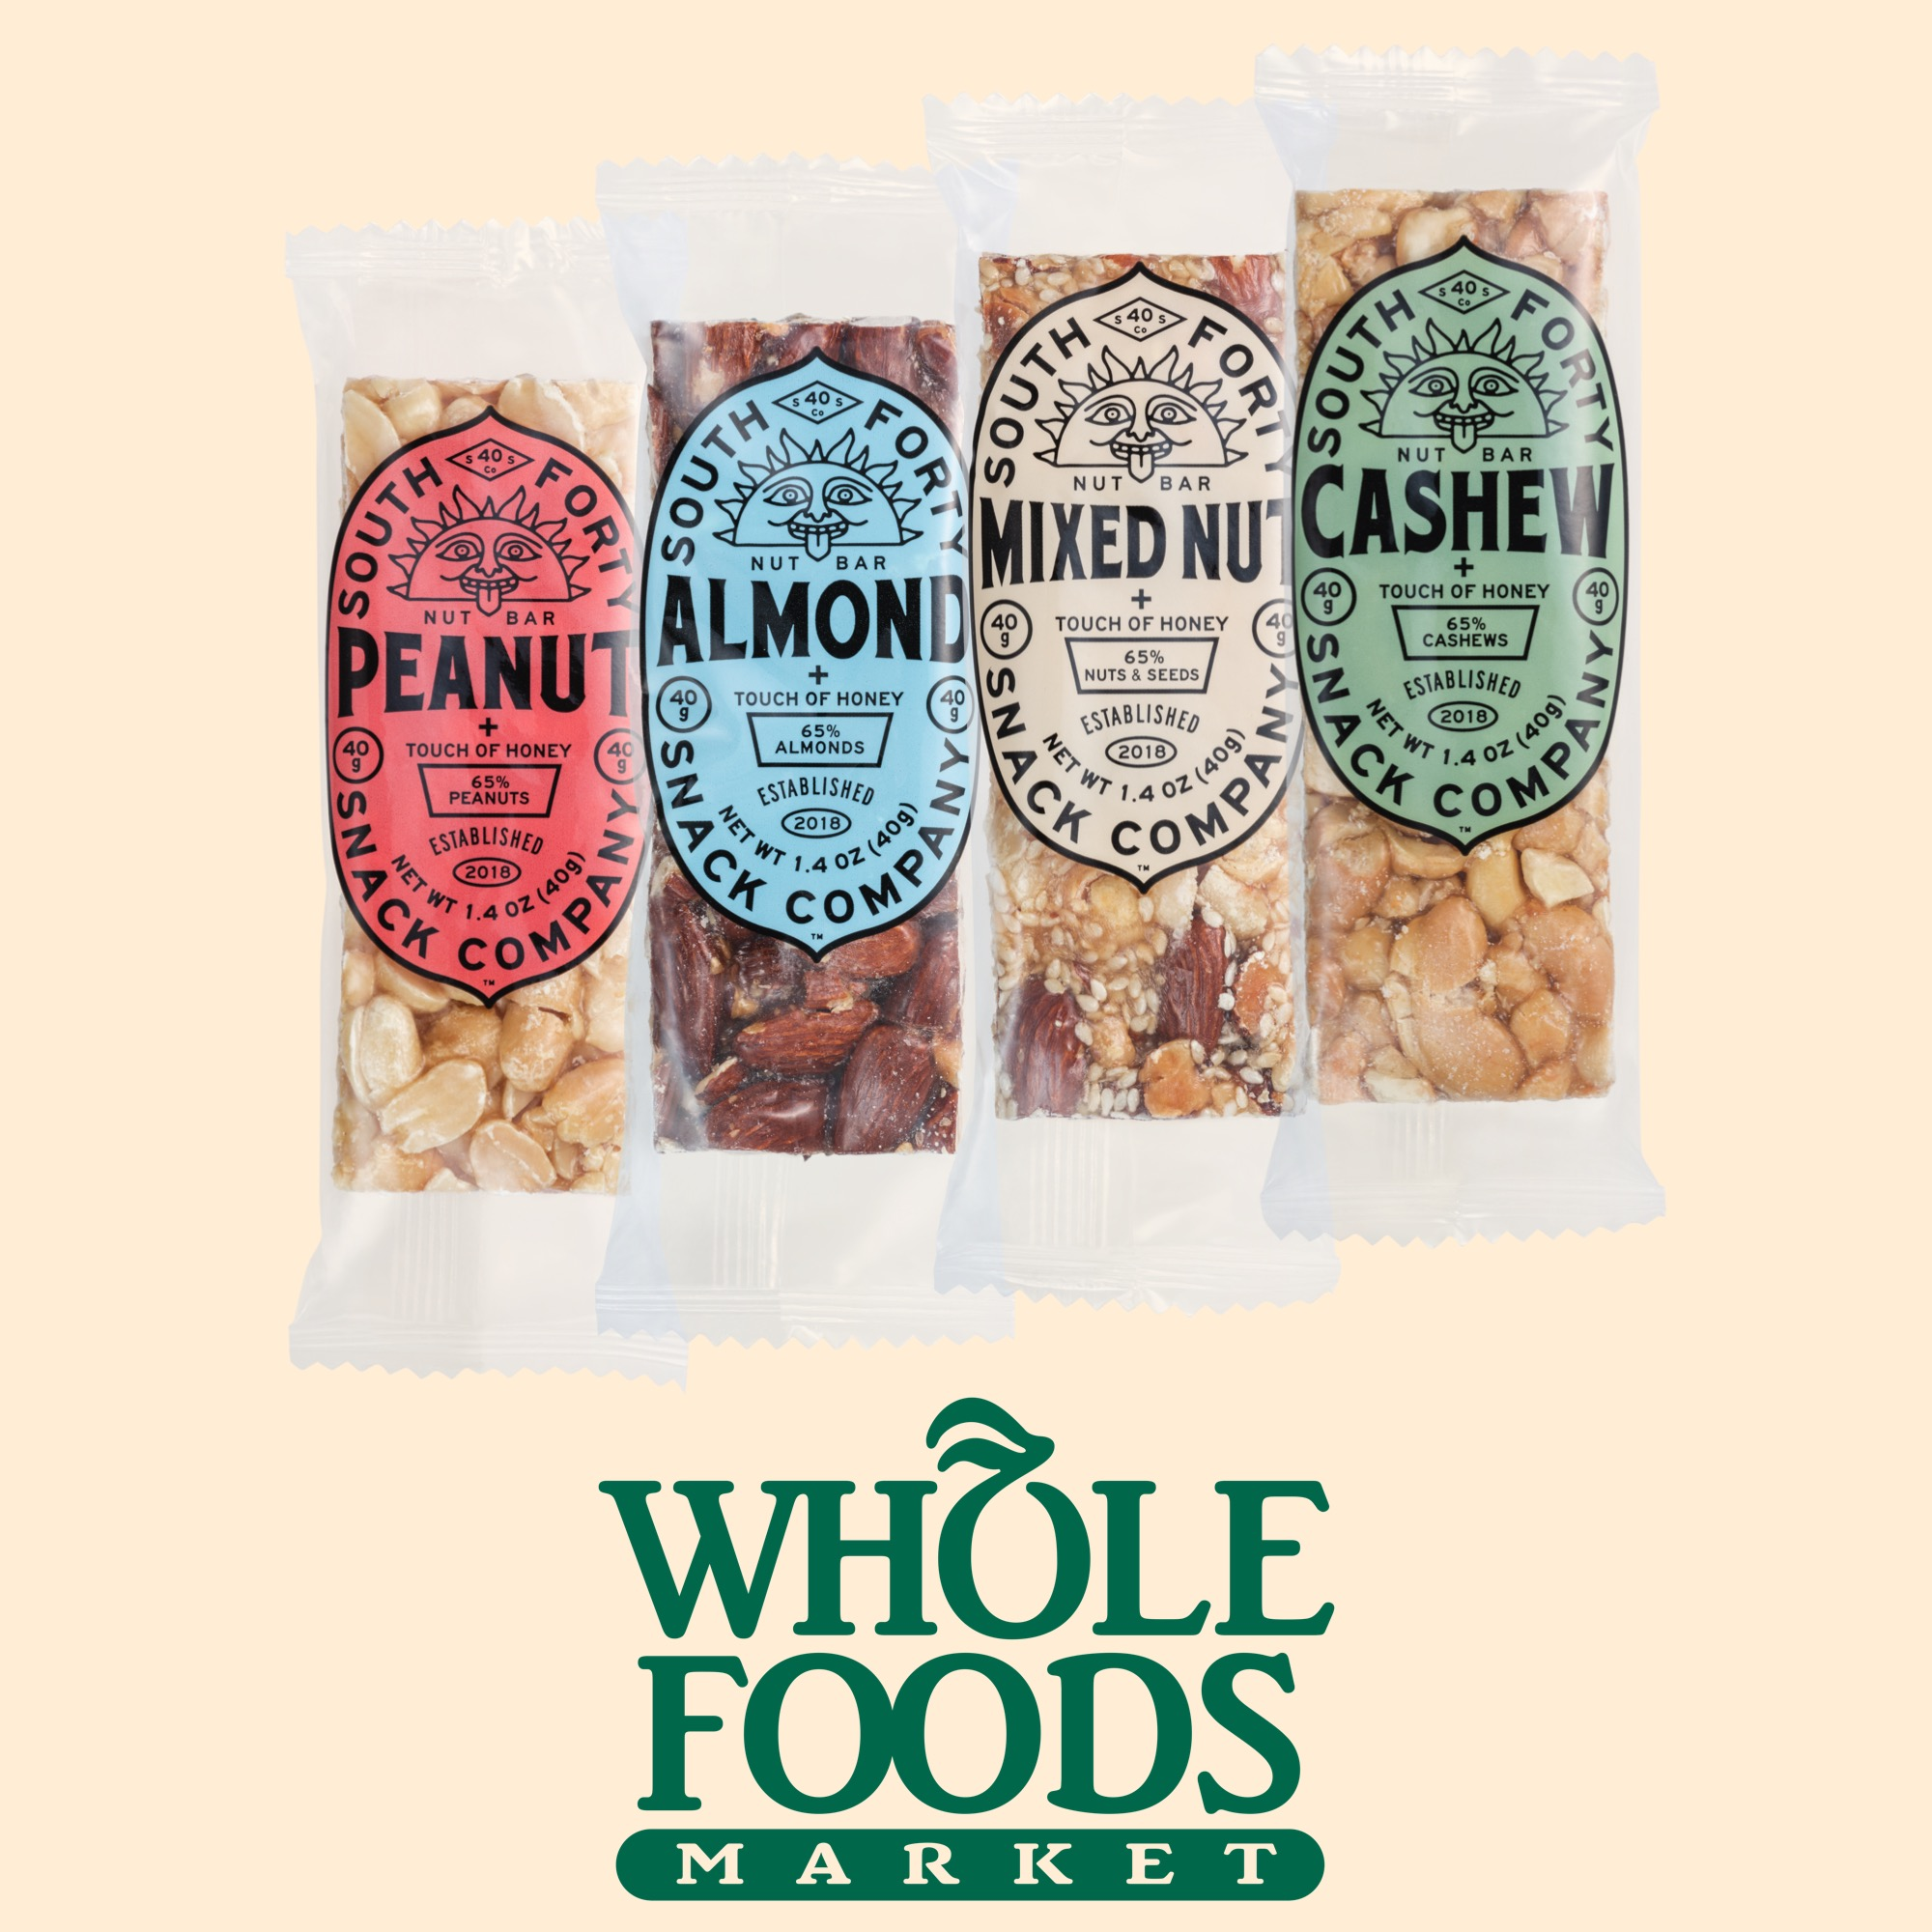 FREE South 40 Snacks Crunchy Nut Bar at Whole Foods